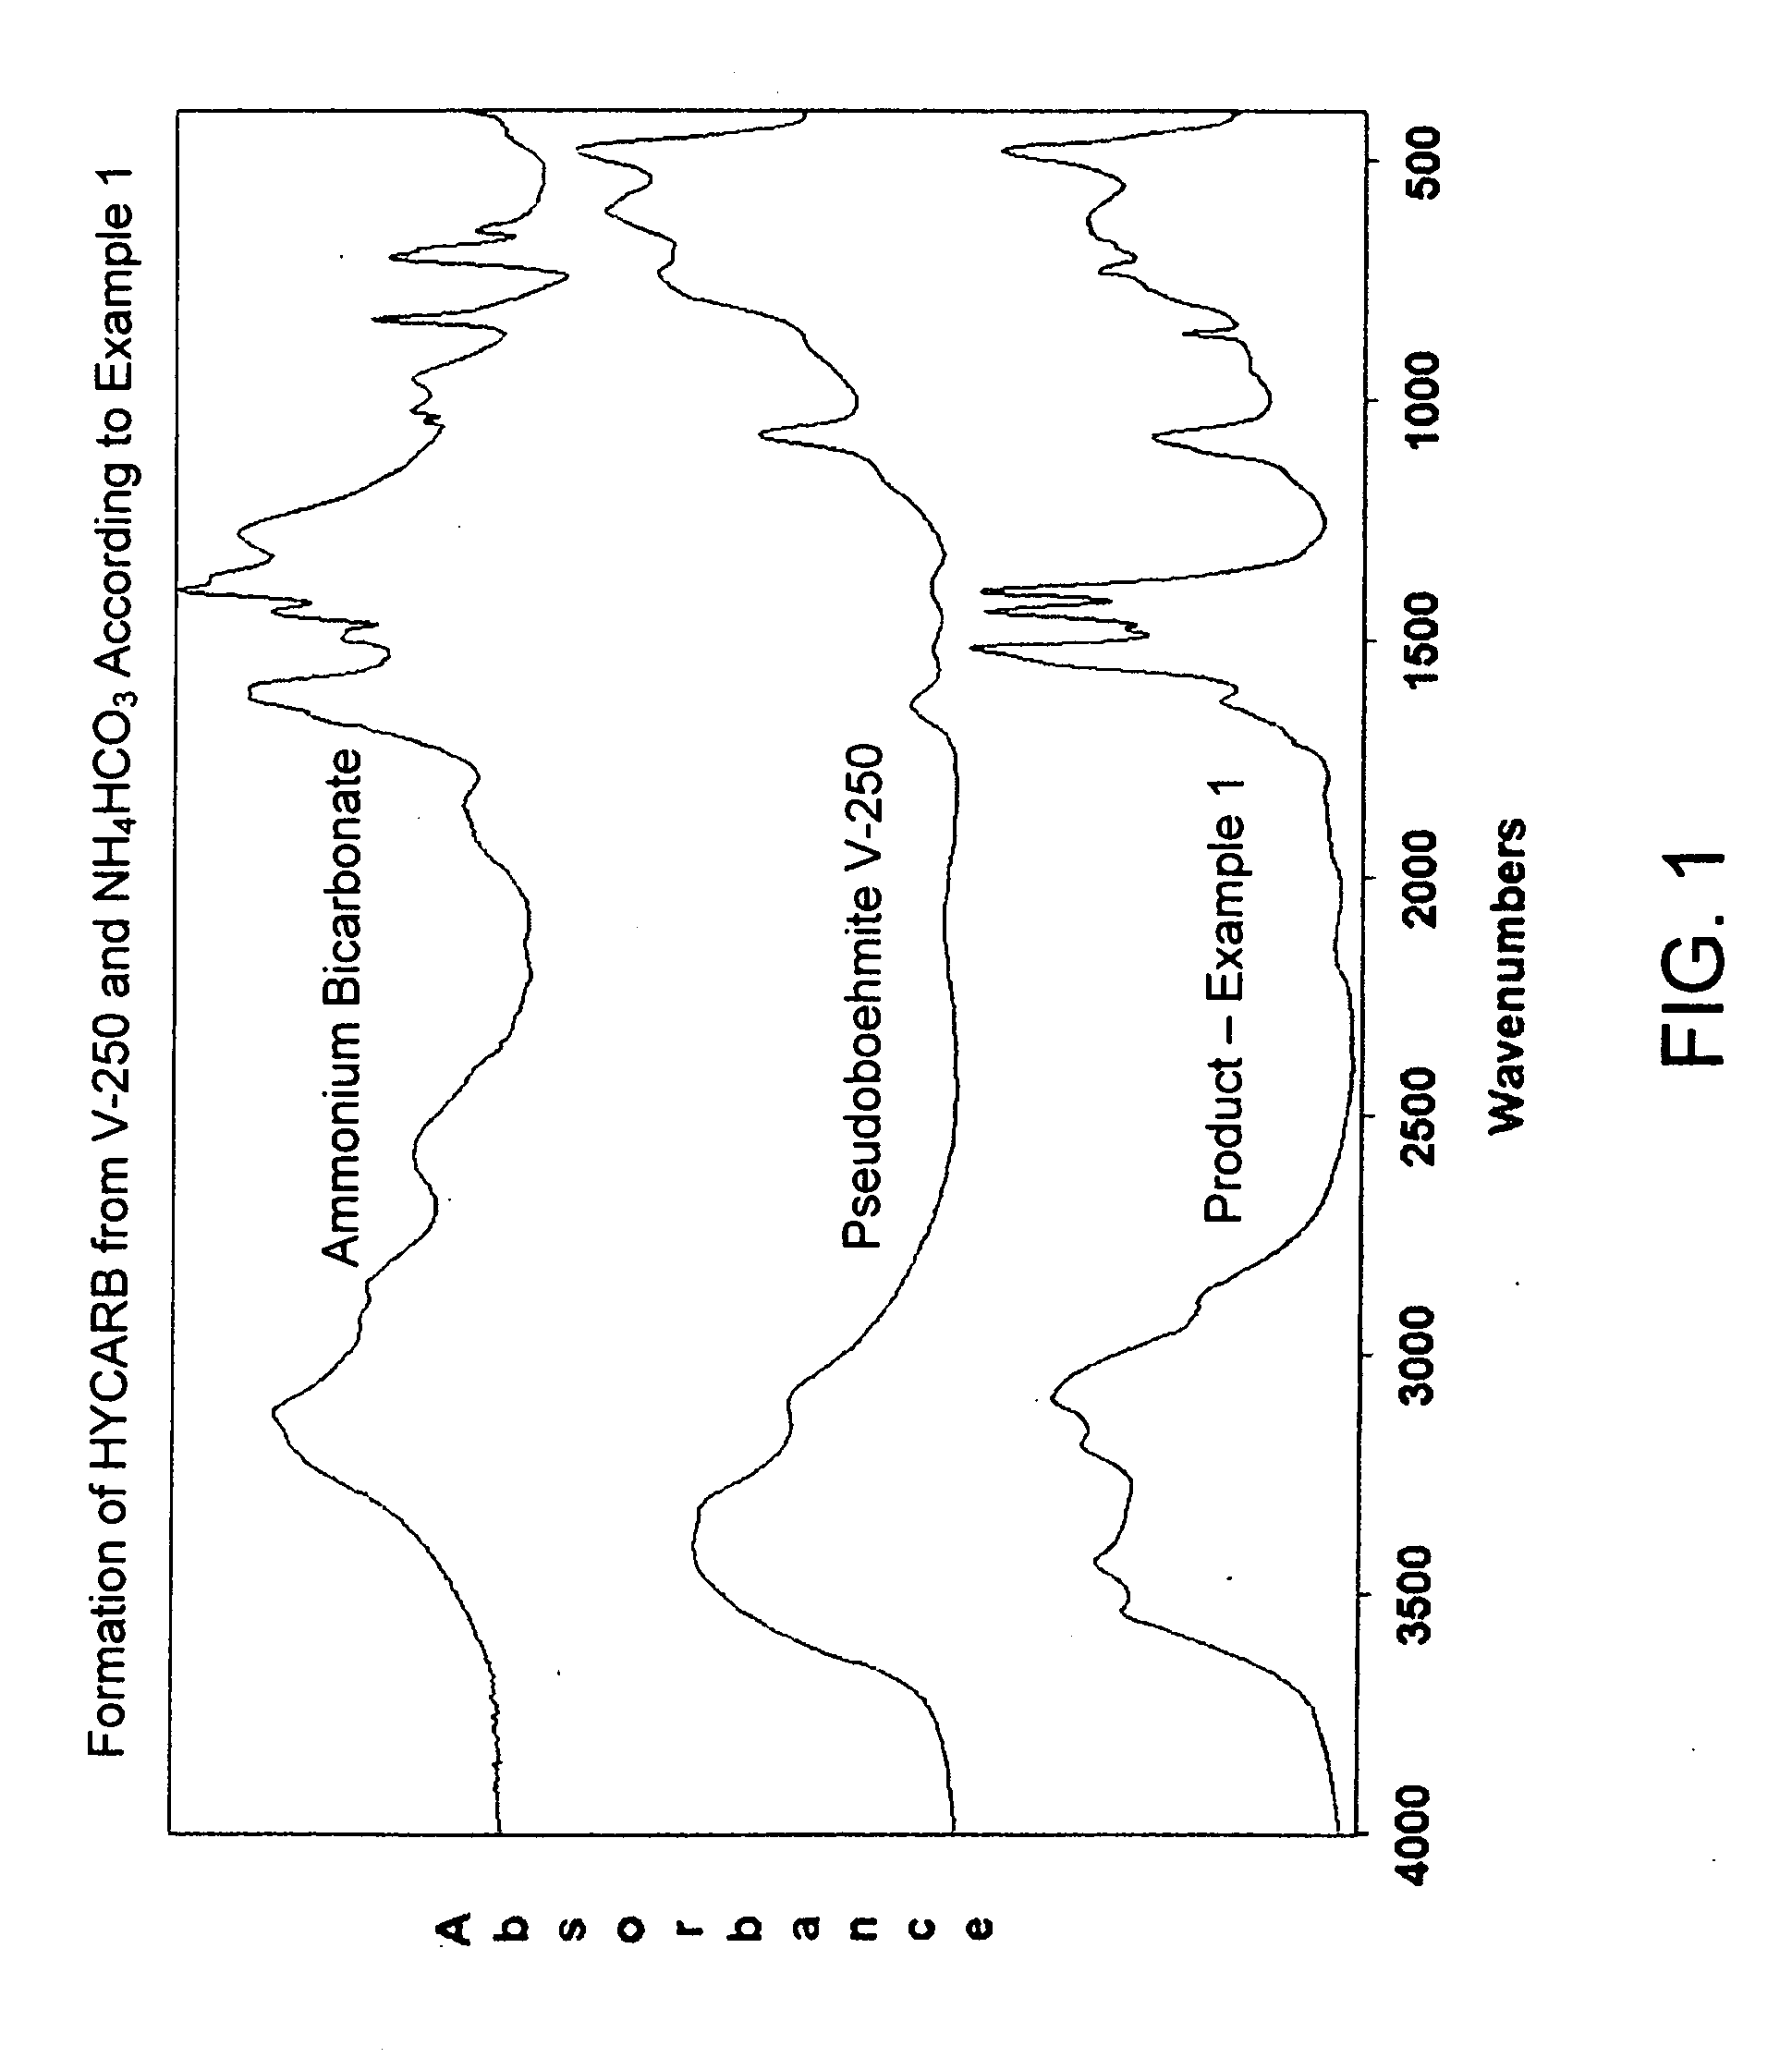 Process for Conversion of Aluminum Oxide Hydroxide